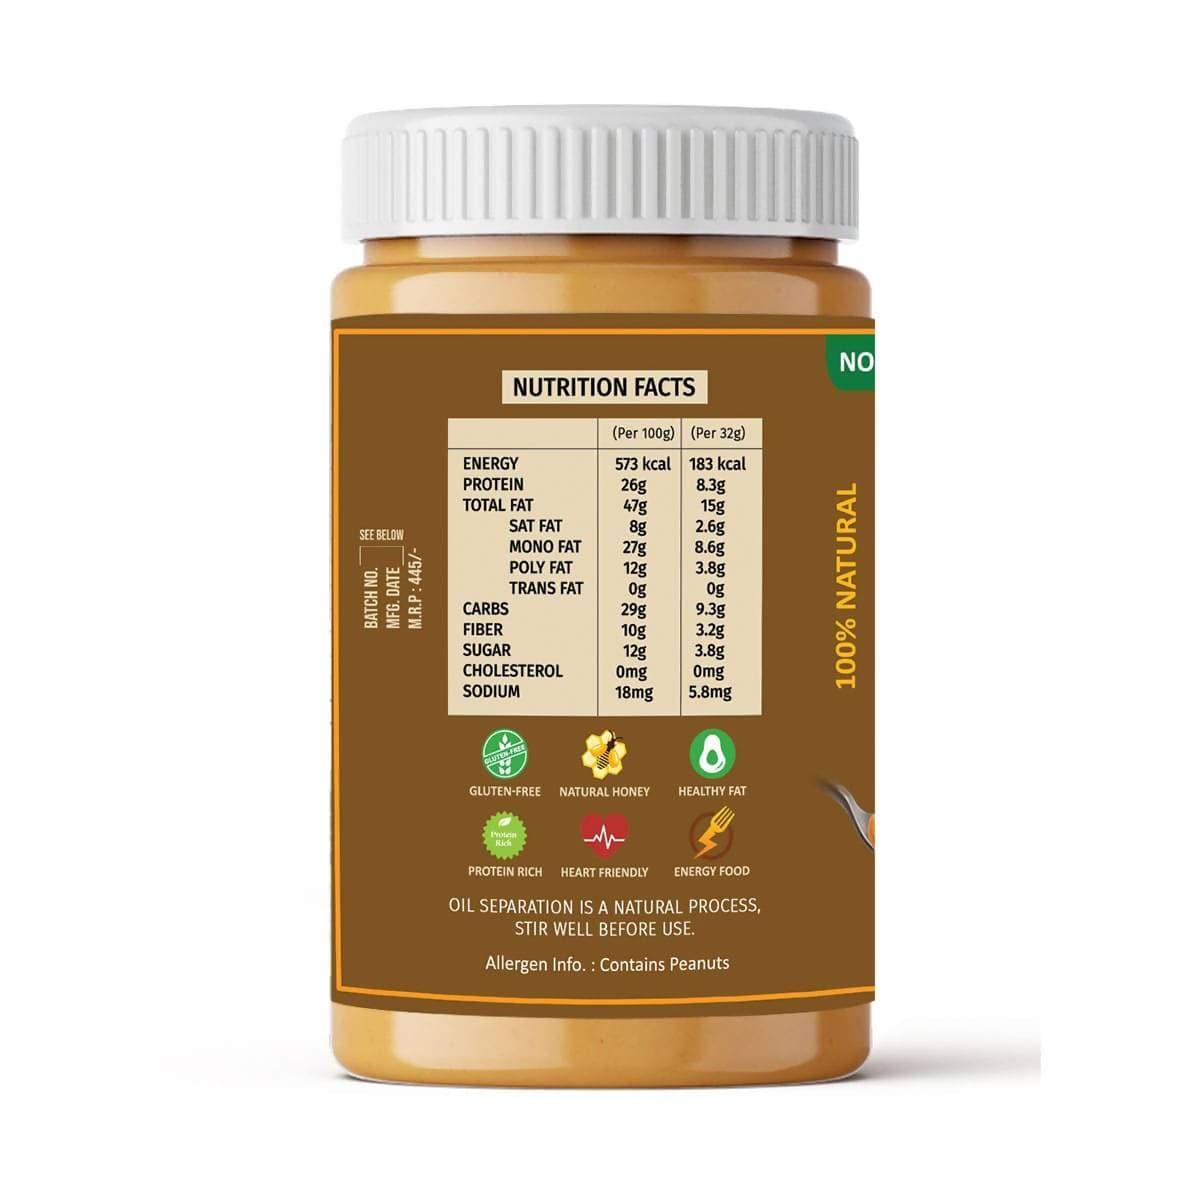 Oye Healthy Peanut Butter Natural Honey Combo Pack of 2 (850gm+340gm)